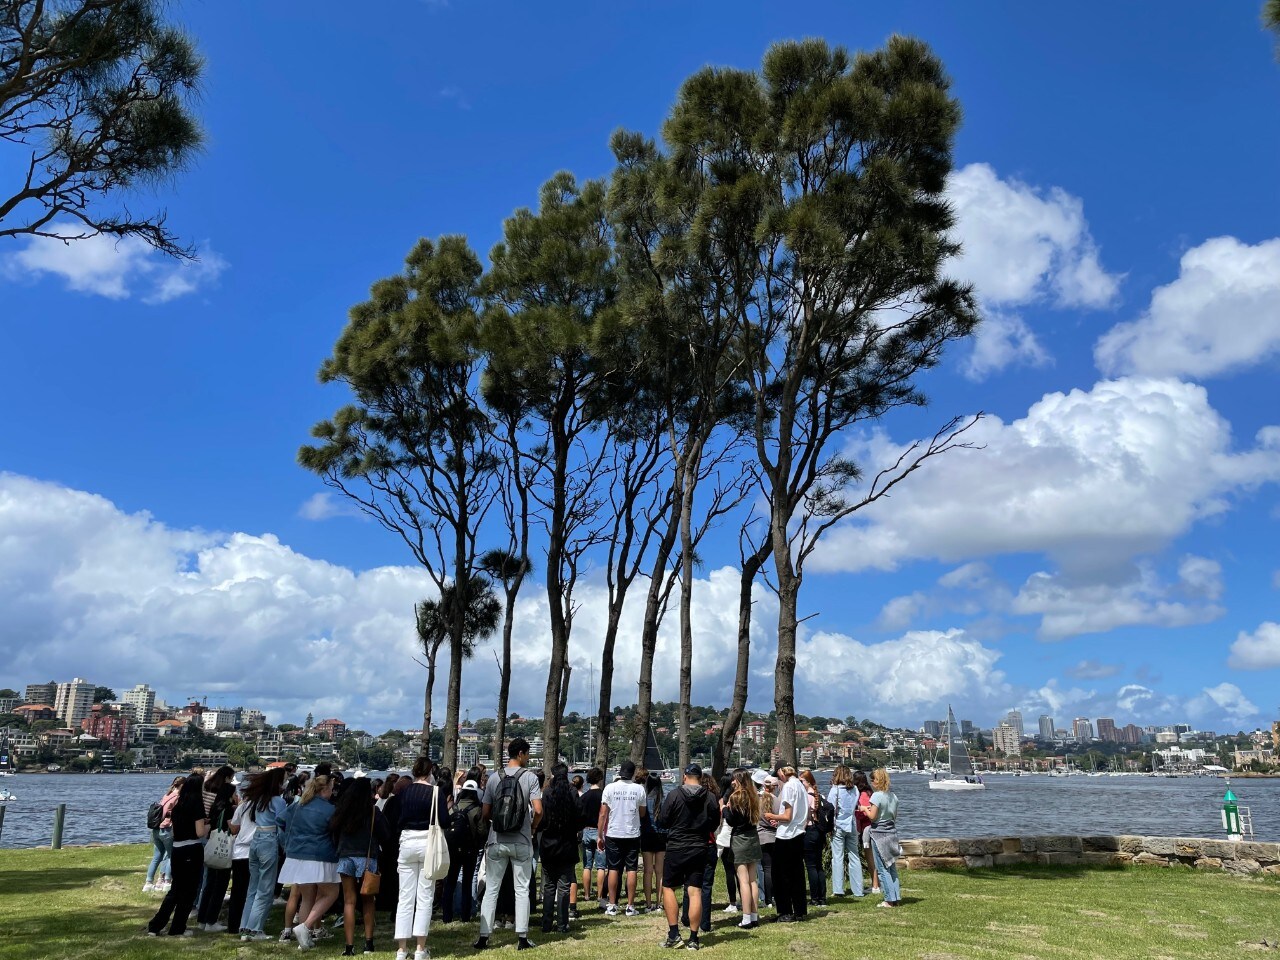 Learning From Country cultural activity, as led by Tribal Warrior, held on Clarke Island, Sydney Harbour.